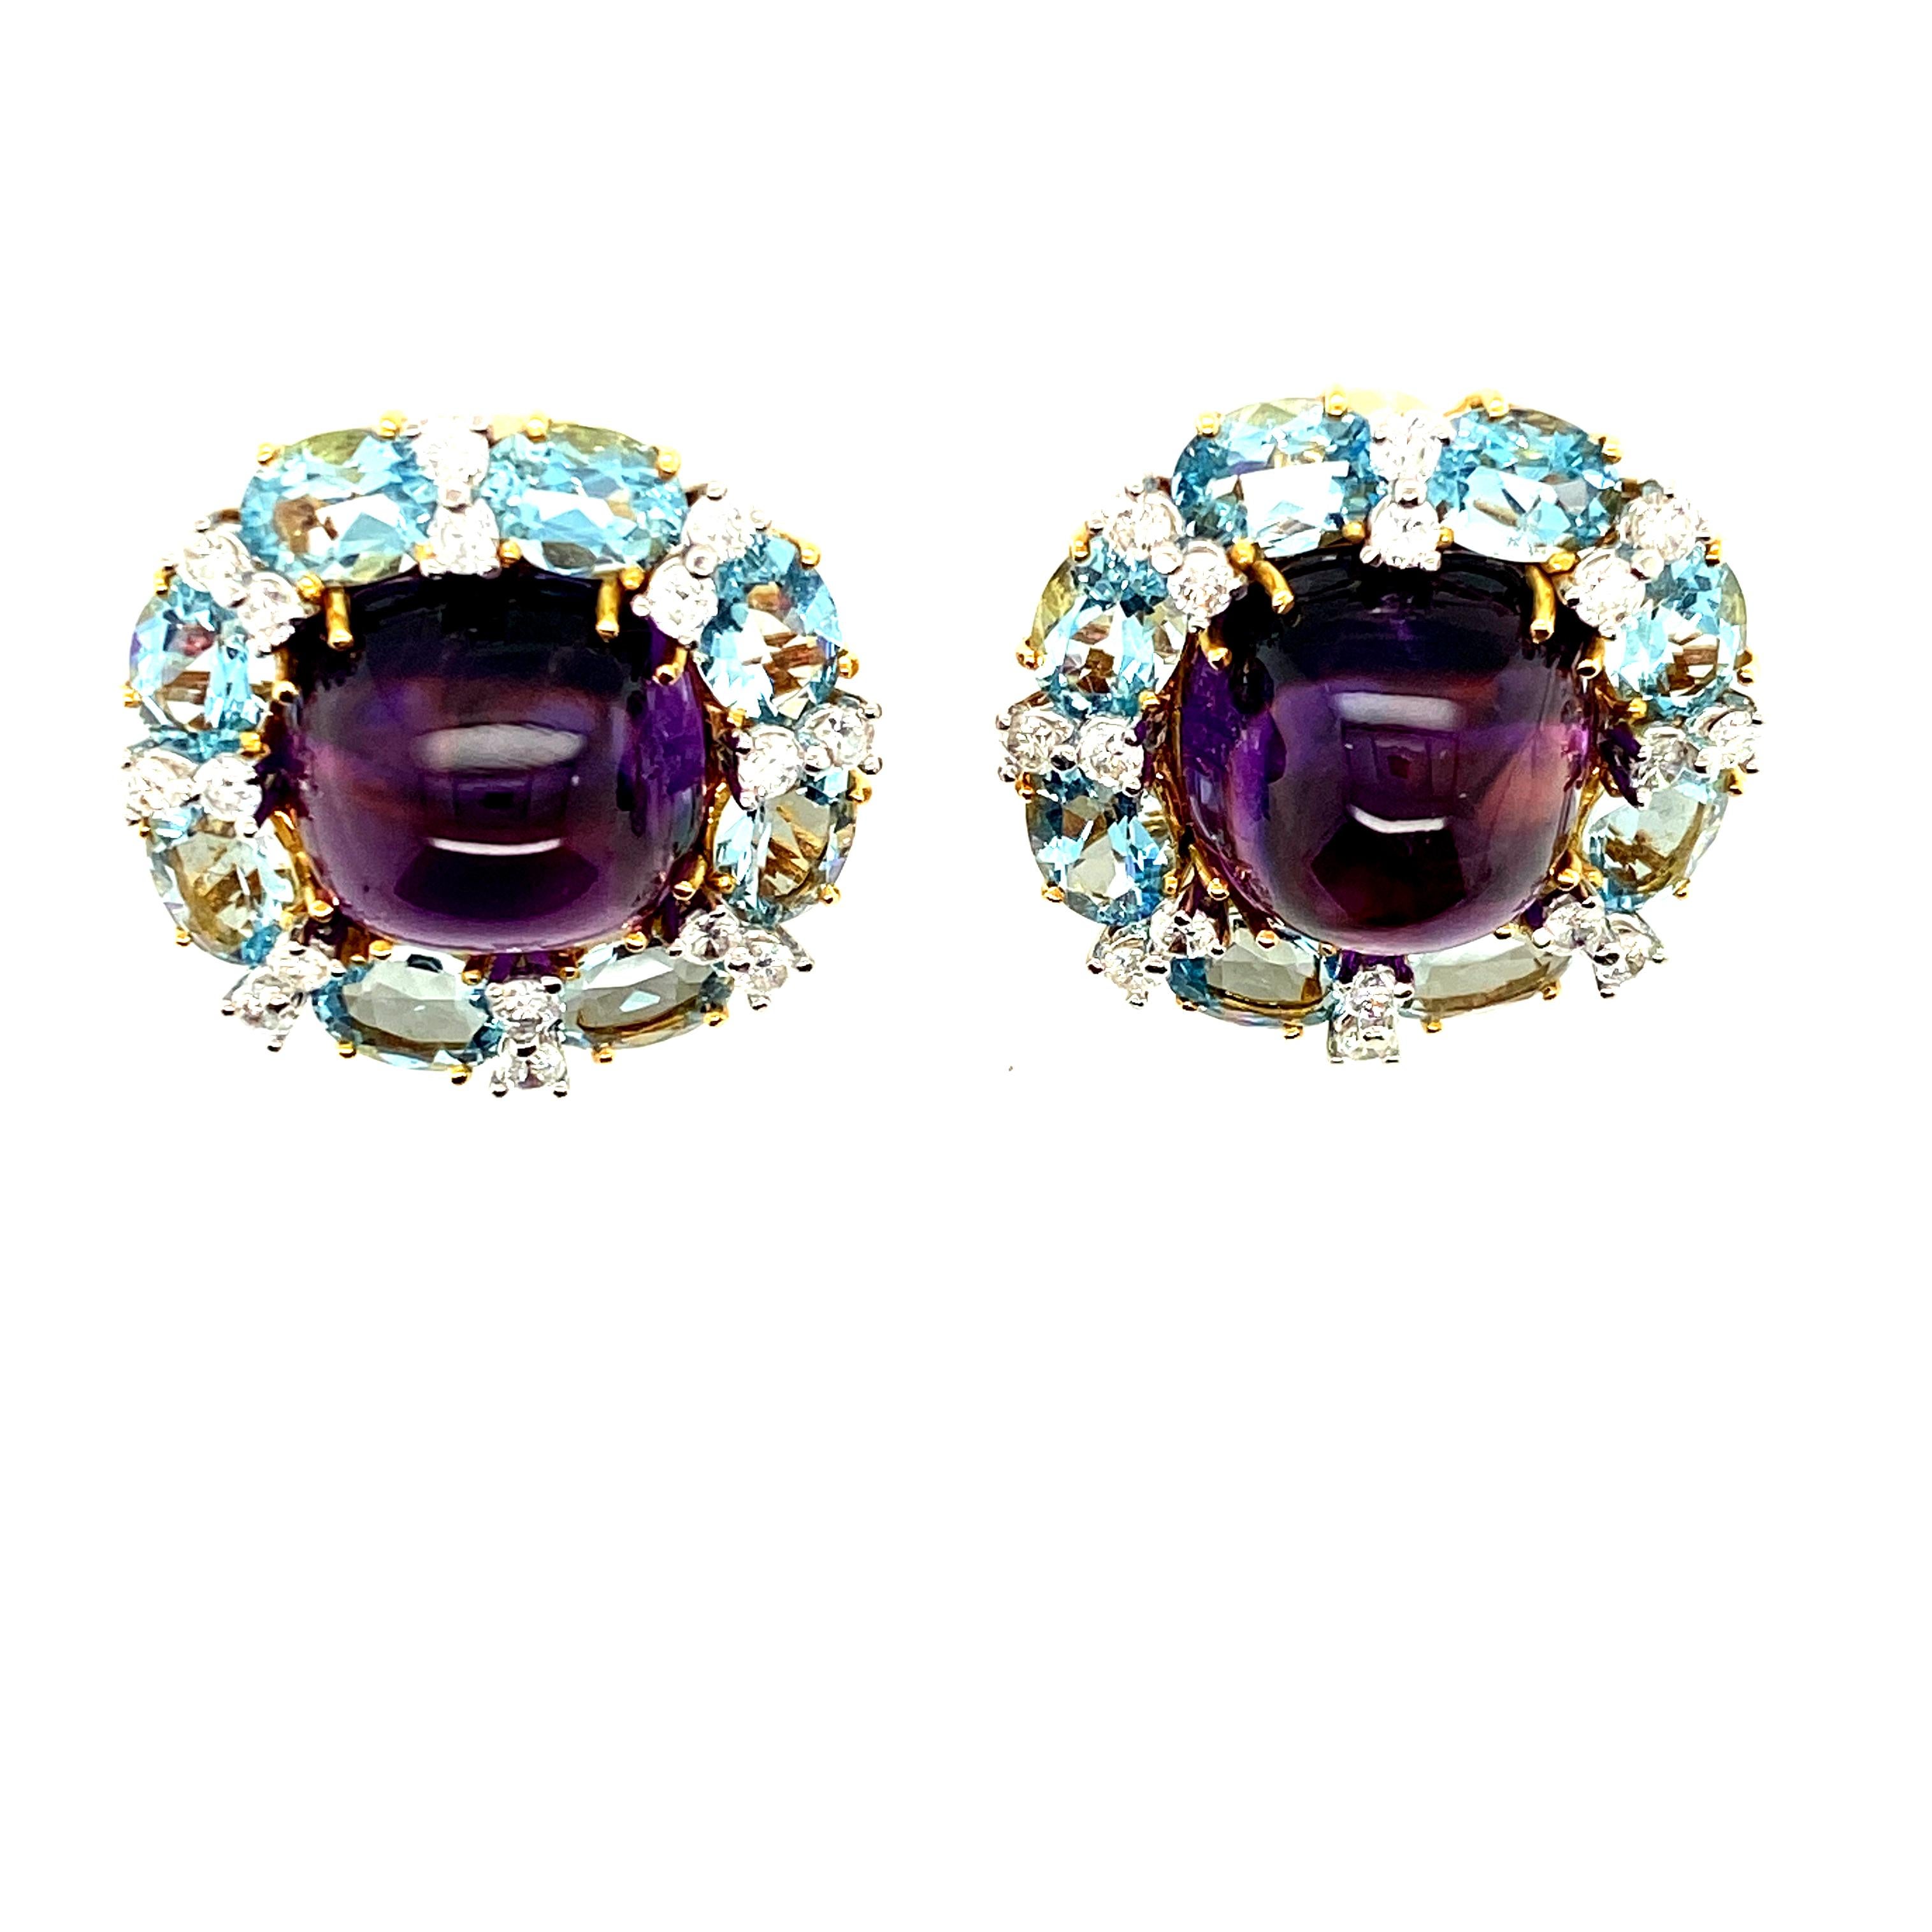 This pair of earrings from famed New York jeweler Valentin Magro features two uniform and eye clean cabochon amethysts, surrounded by a halo of alternating aquamarines and an estimated 1.6cts of diamonds.  In addition to the creative design, which